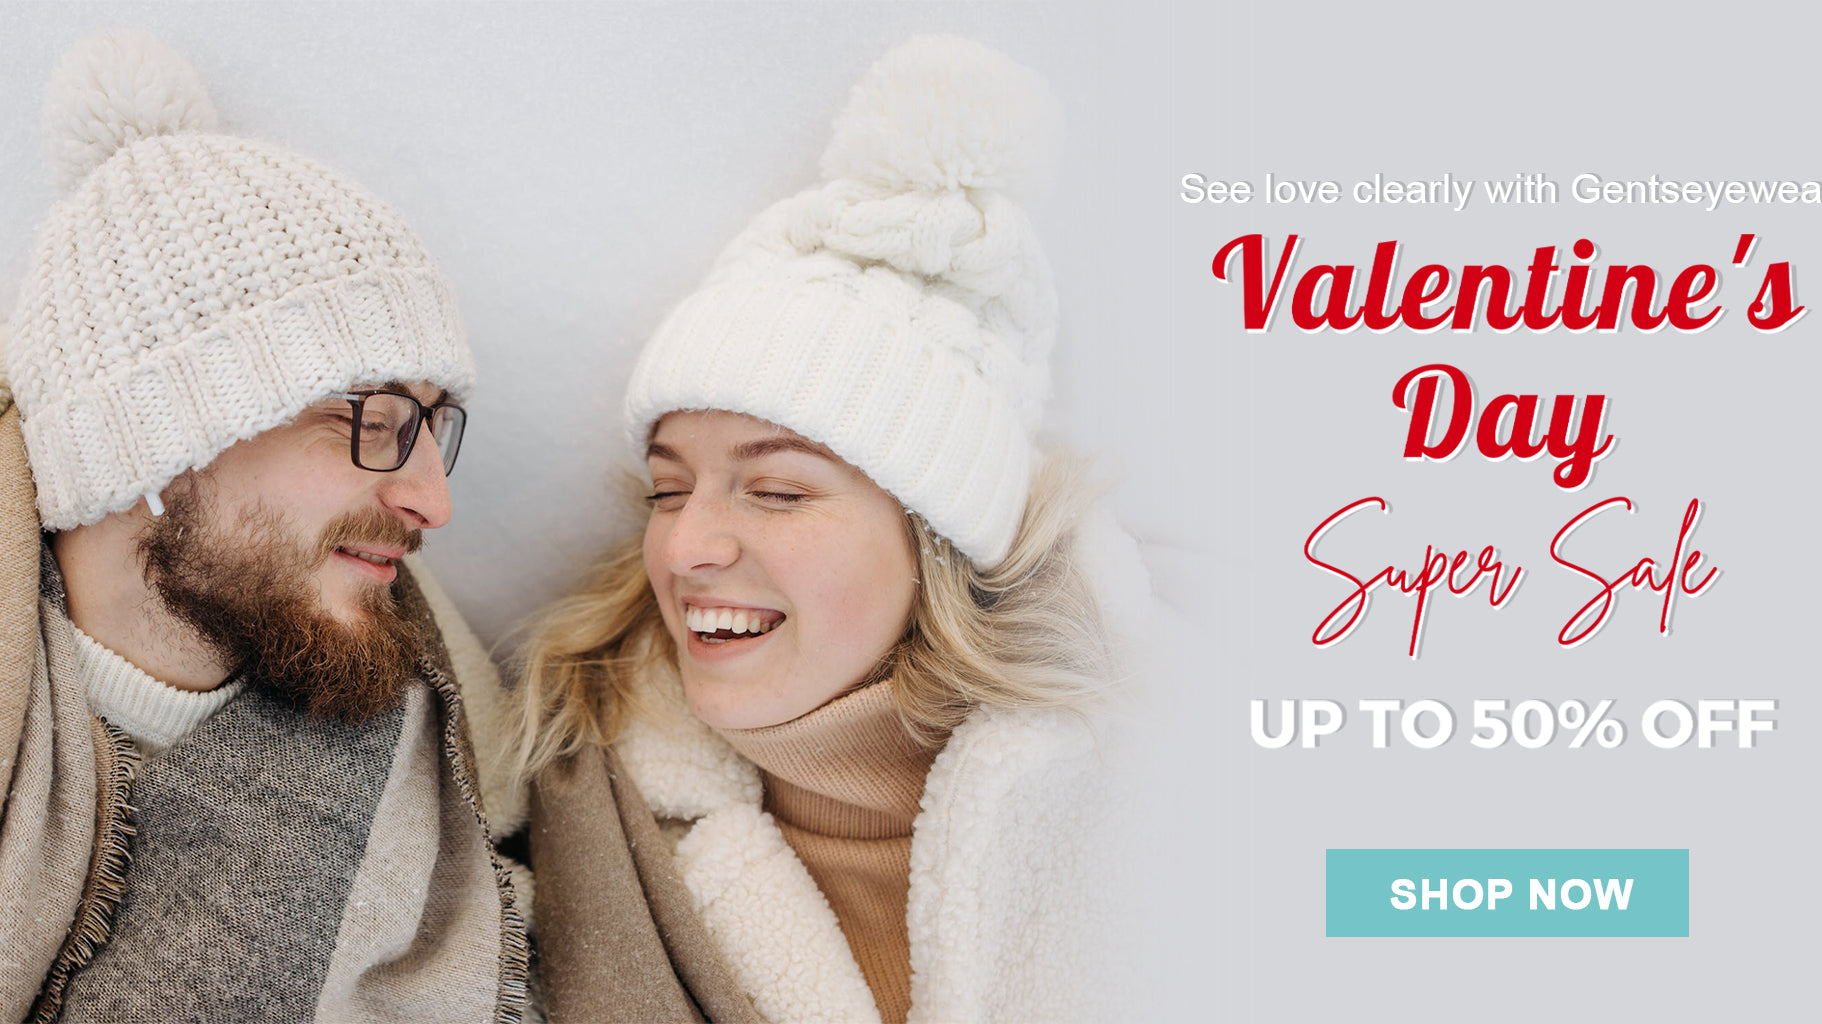 See love clearly with high-quality frames from Gentseyewear this Valentine's Day